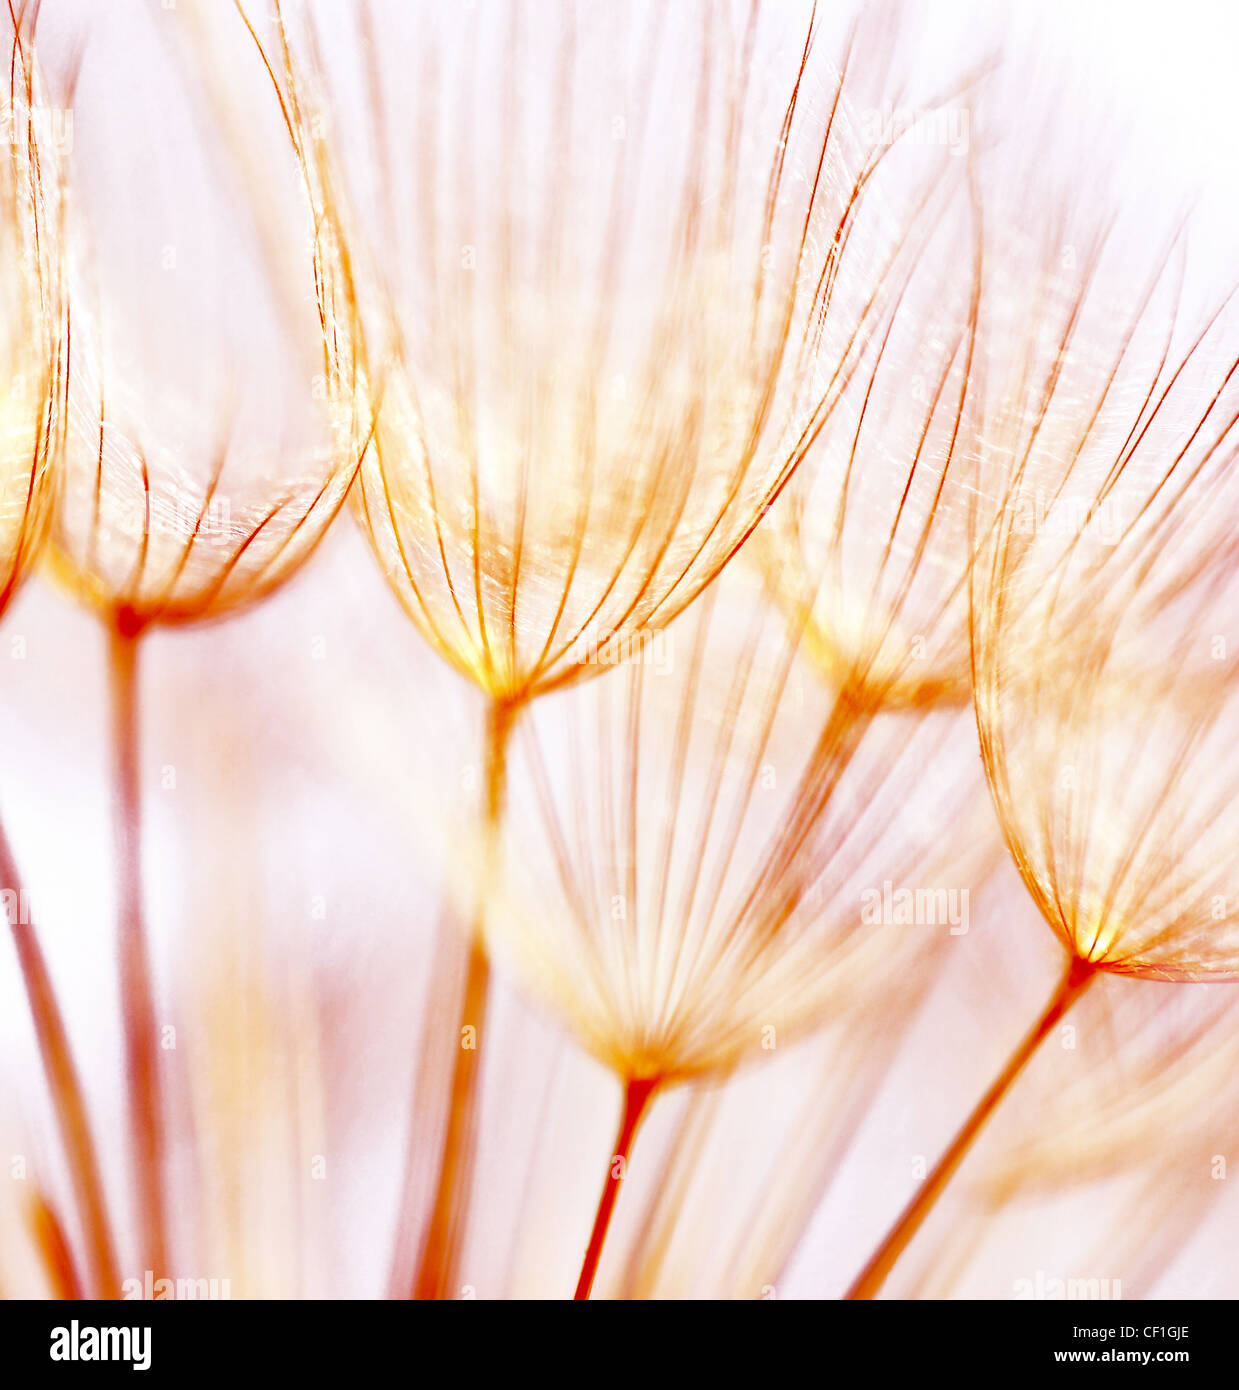 Abstract dandelion flower background, extreme closeup with soft focus, beautiful nature details Stock Photo